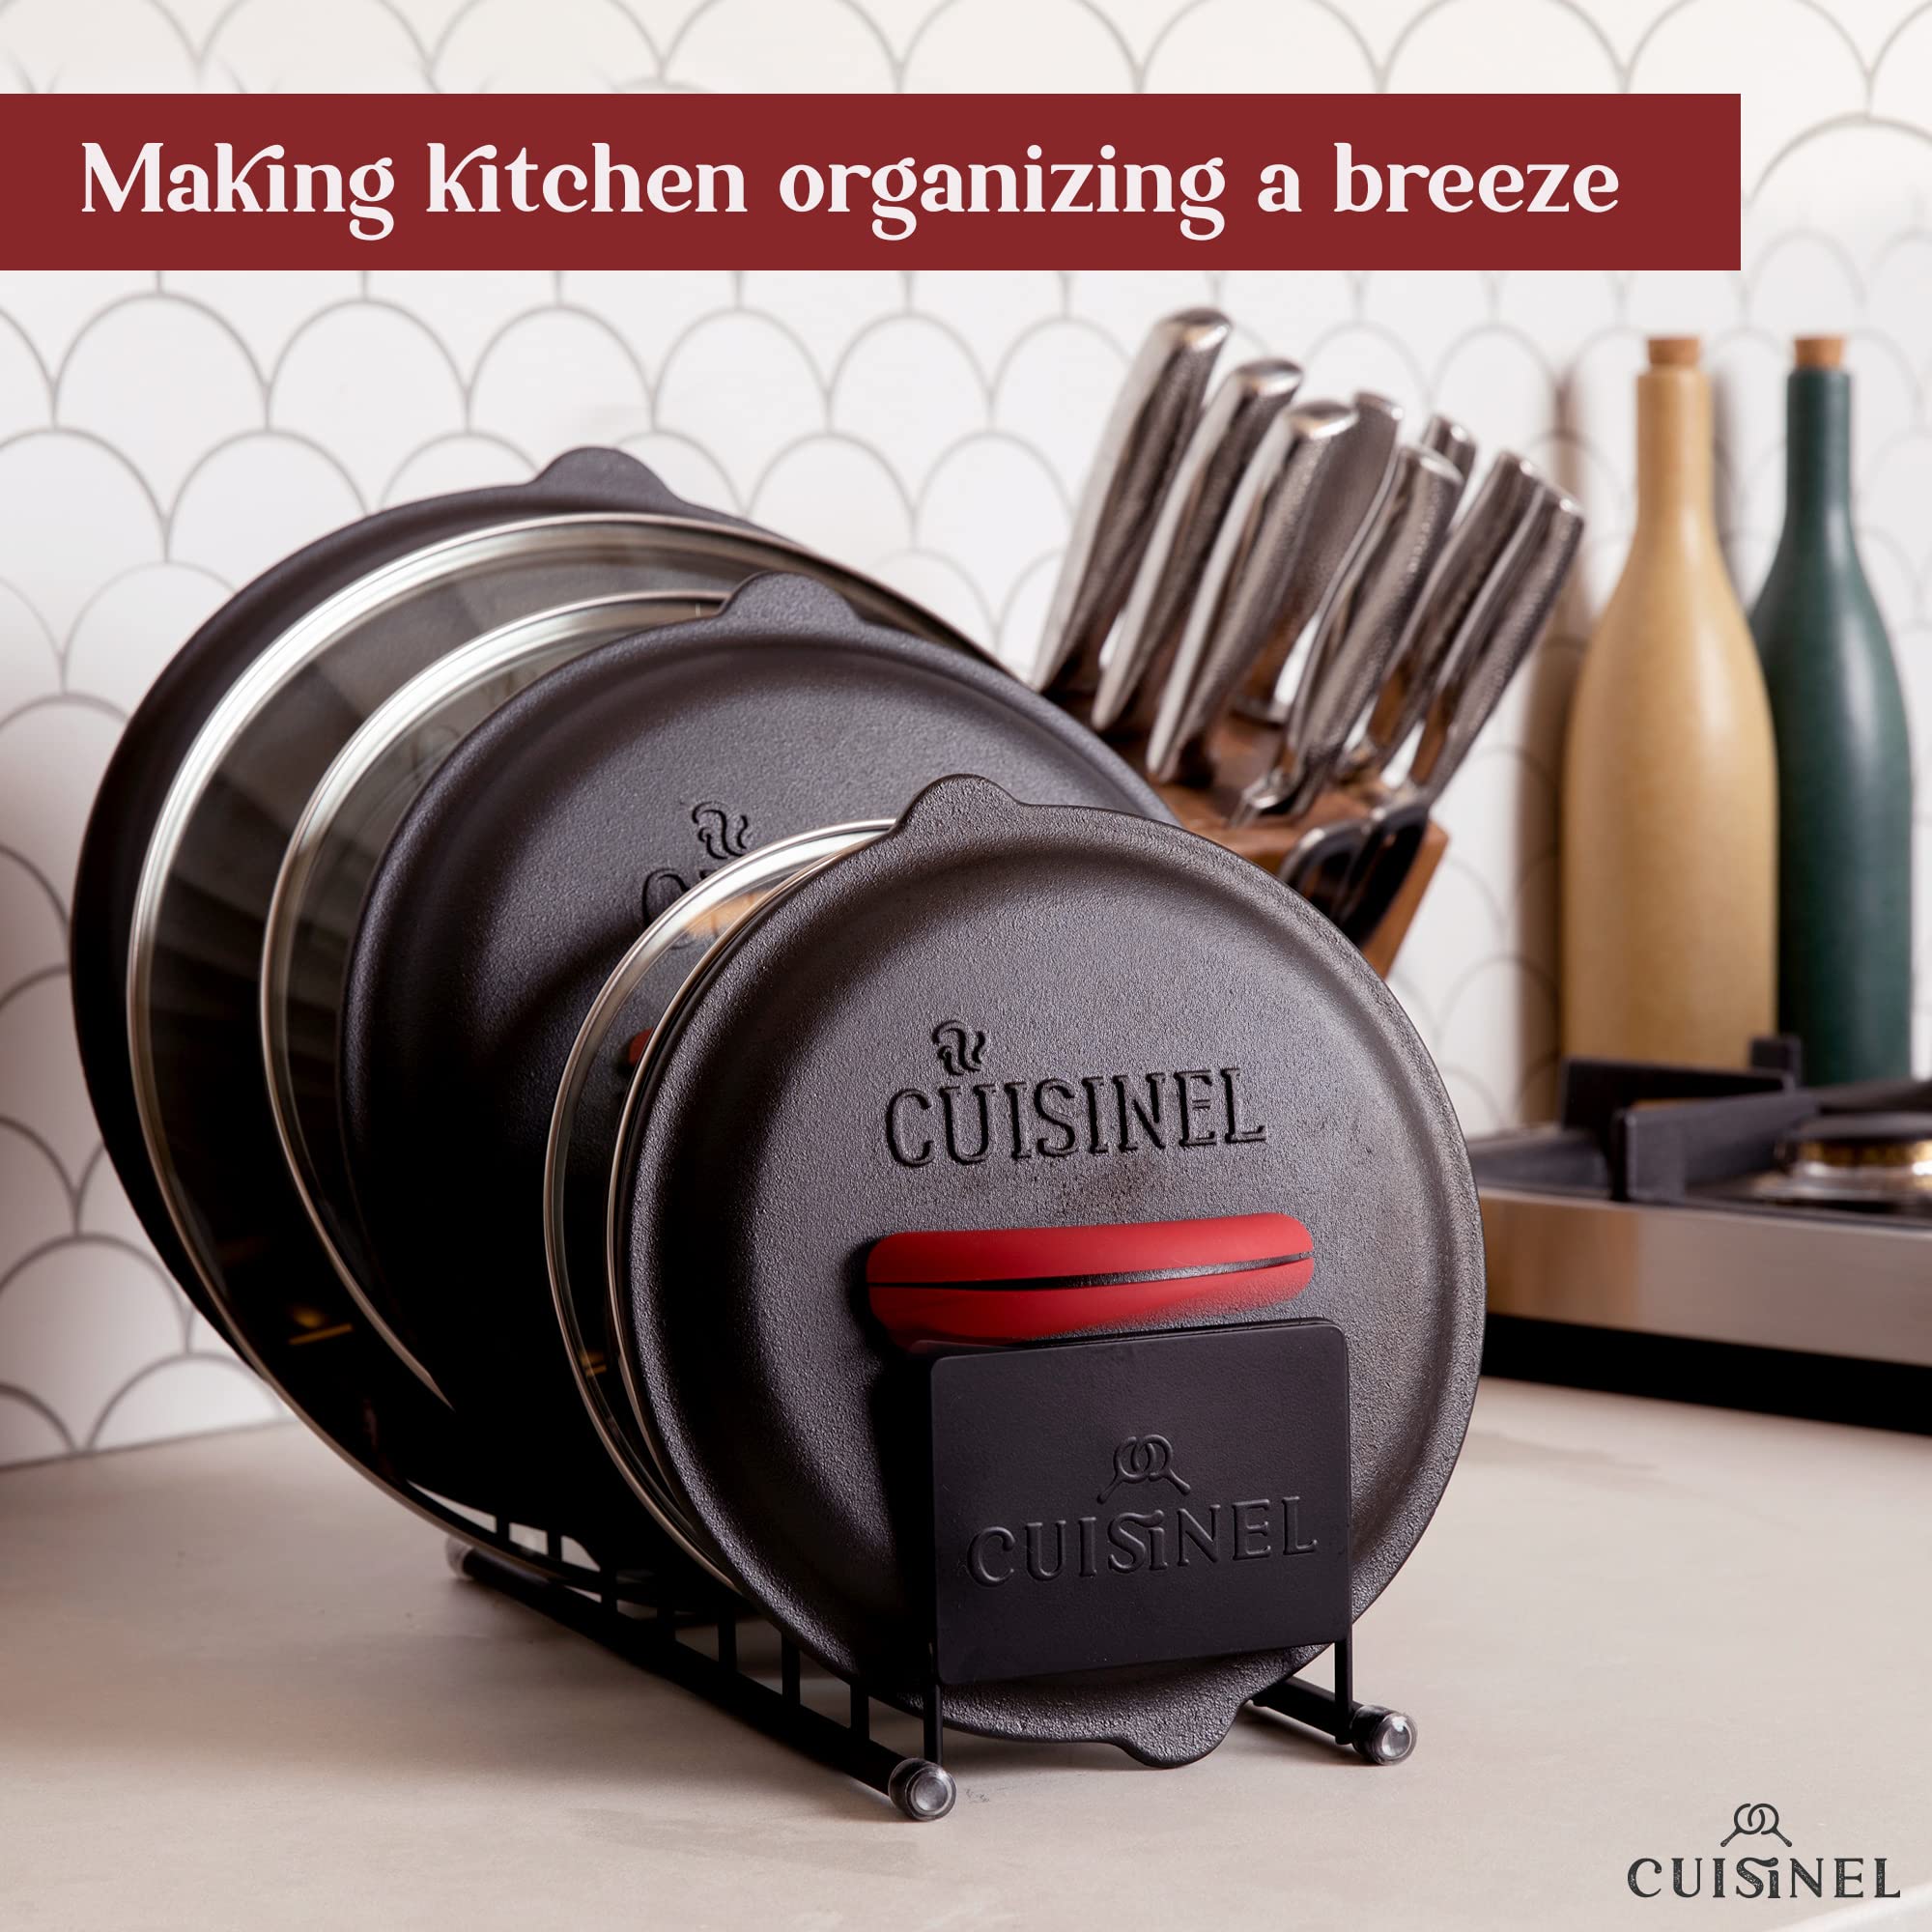 Cuisinel Heavy Duty Pan Organizer, 5 Tier Rack - Holds up to 50 LB - Holds Cast Iron Skillets, Griddles and Shallow Pots - Durable Steel Construction - Space Saving Kitchen Storage  - Acceptable